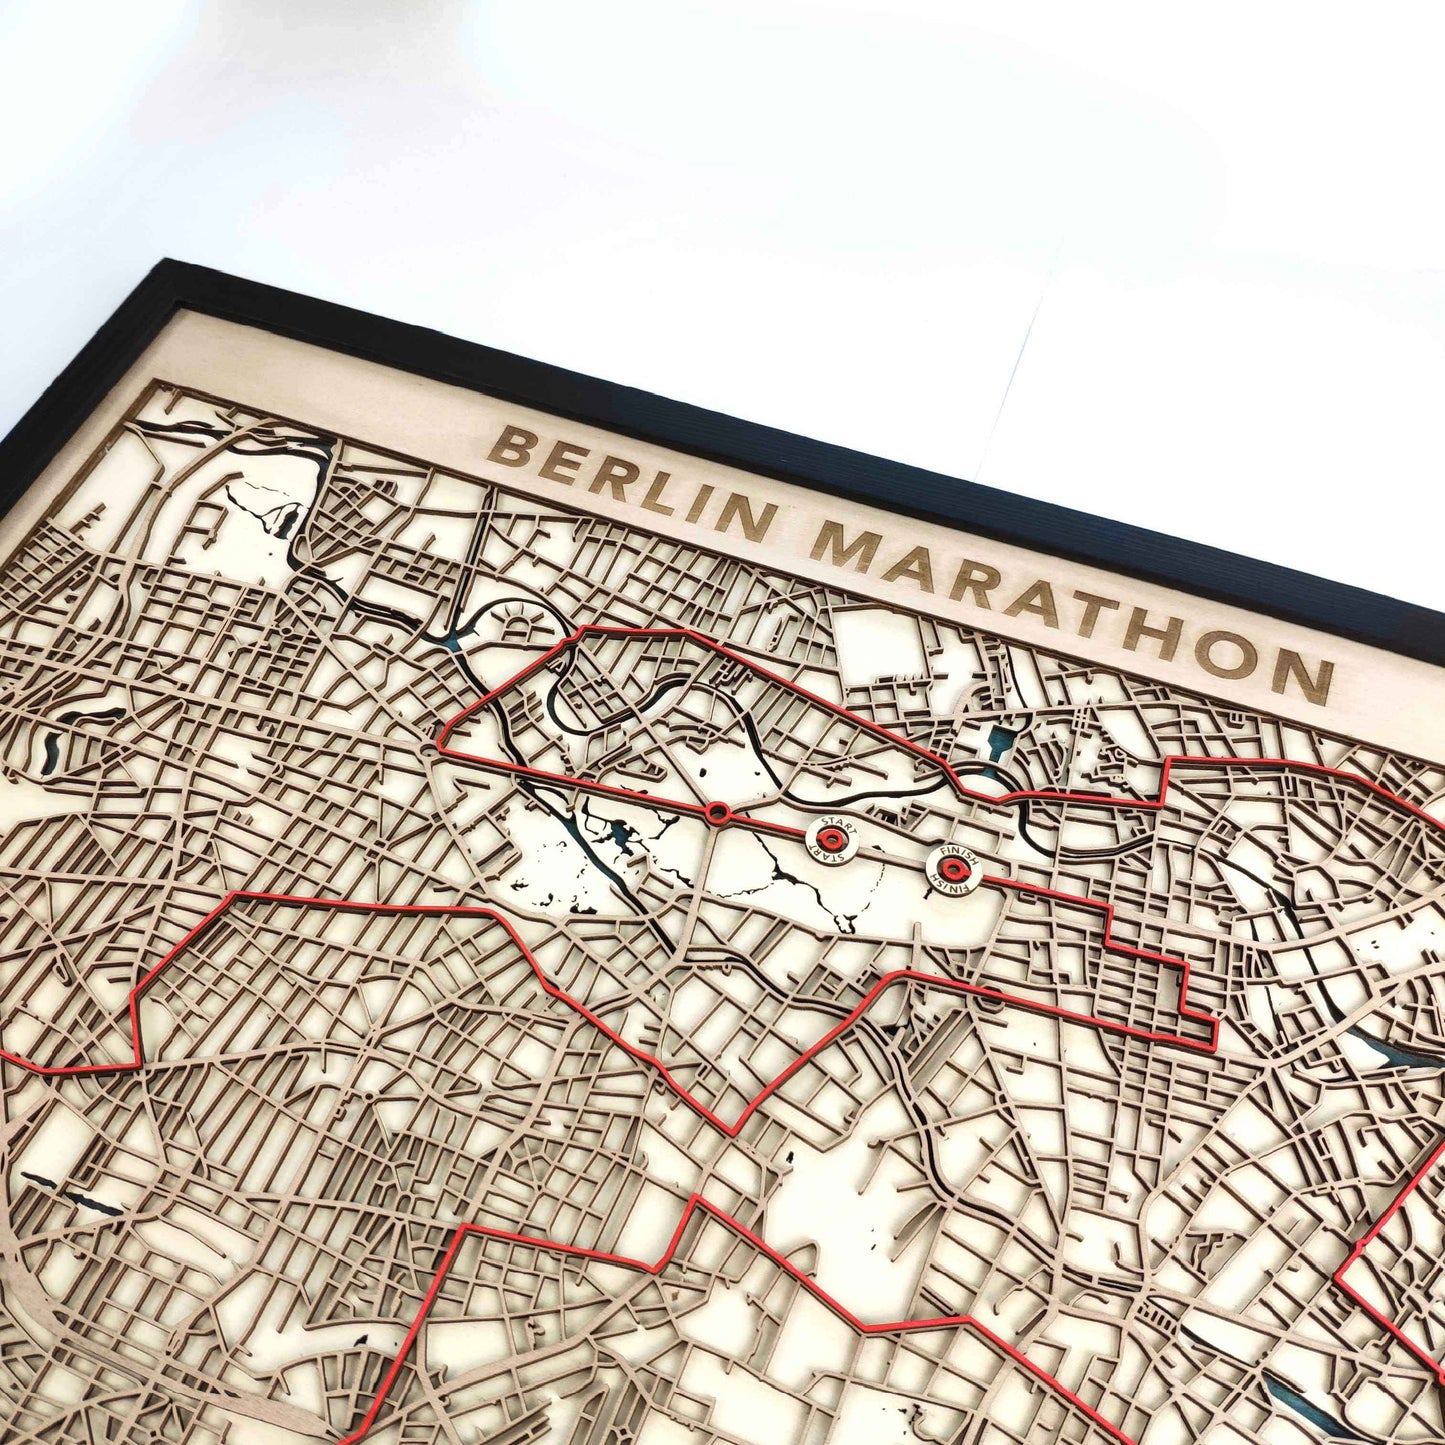 Berlin Marathon Wooden Map by CityWood - Custom Wood Map Art - Unique Laser Cut Engraved - Anniversary Gift